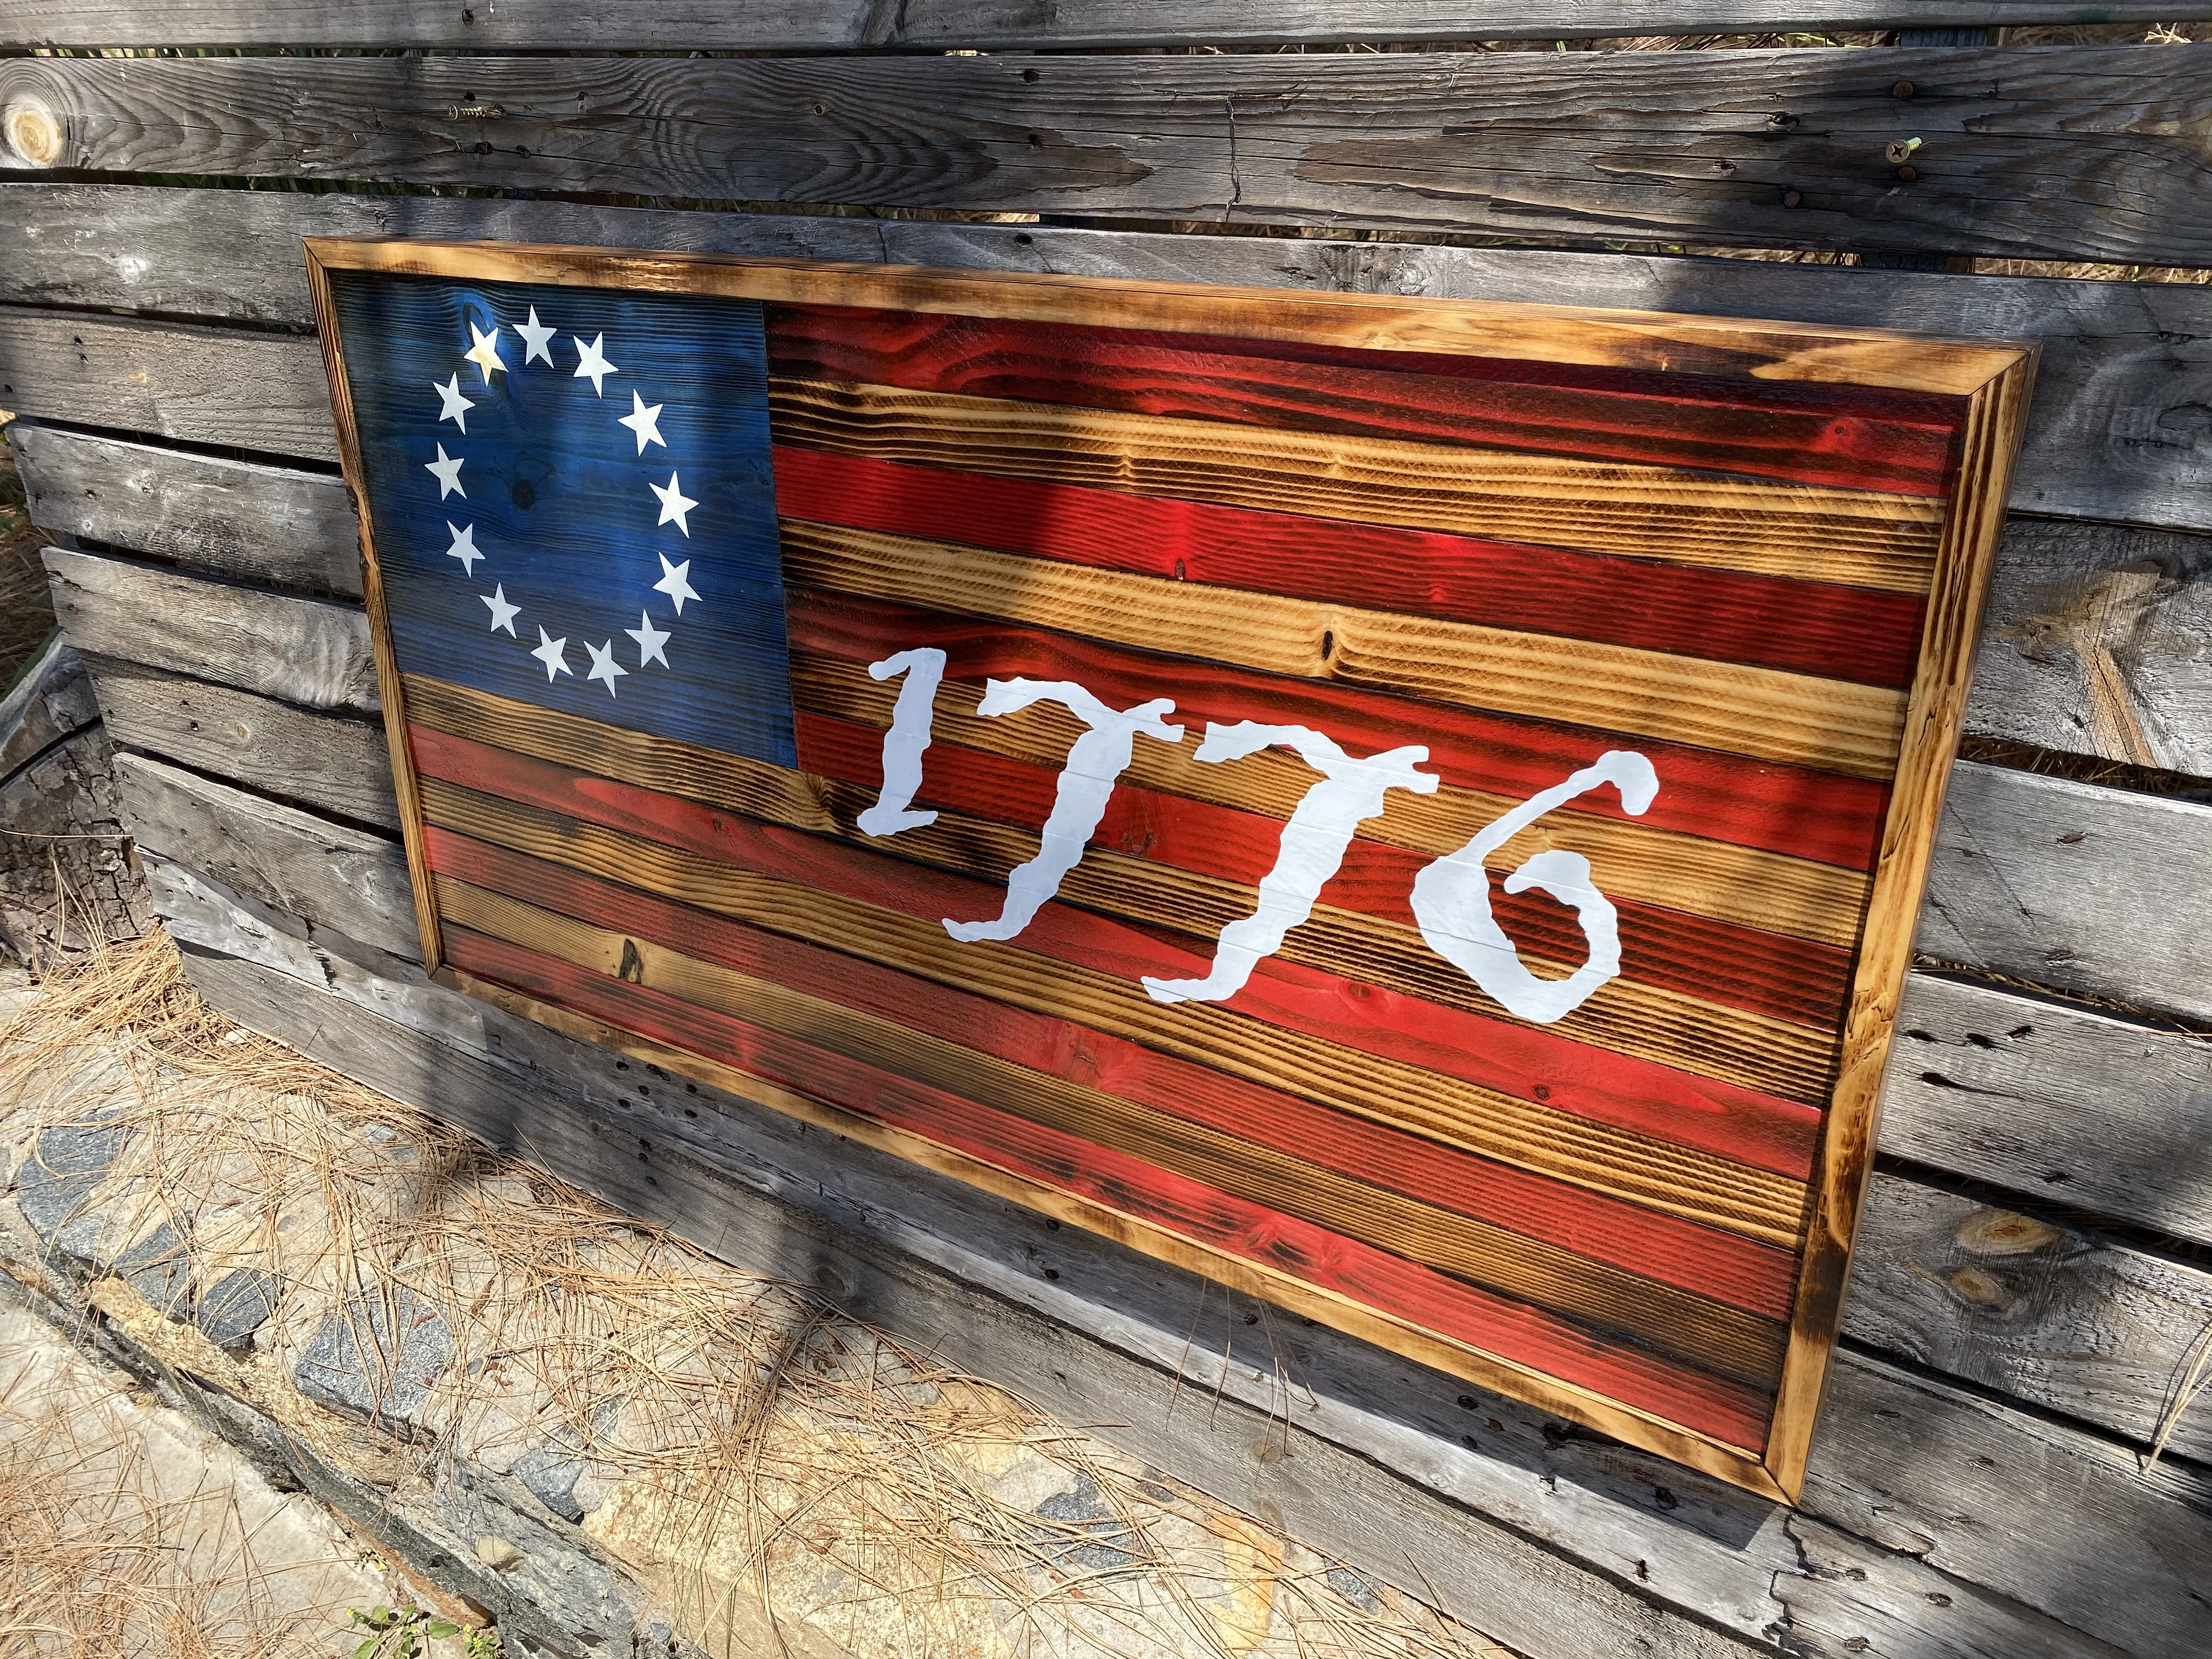 The Rustic 1776